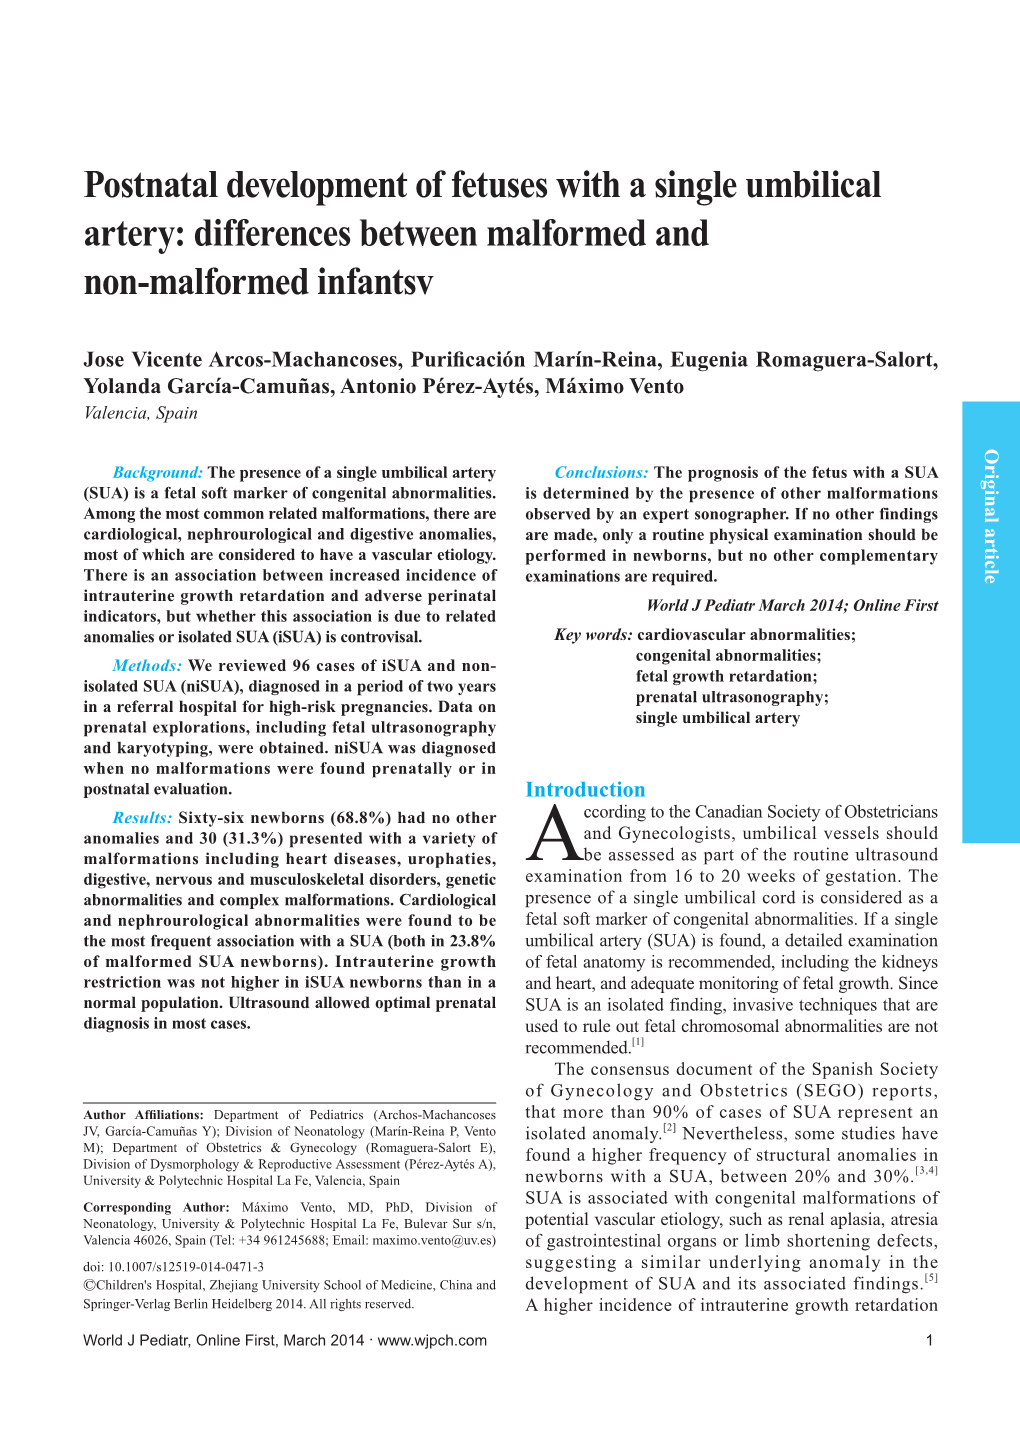 Postnatal Development of Fetuses with a Single Umbilical Artery: Differences Between Malformed and Non-Malformed Infantsv